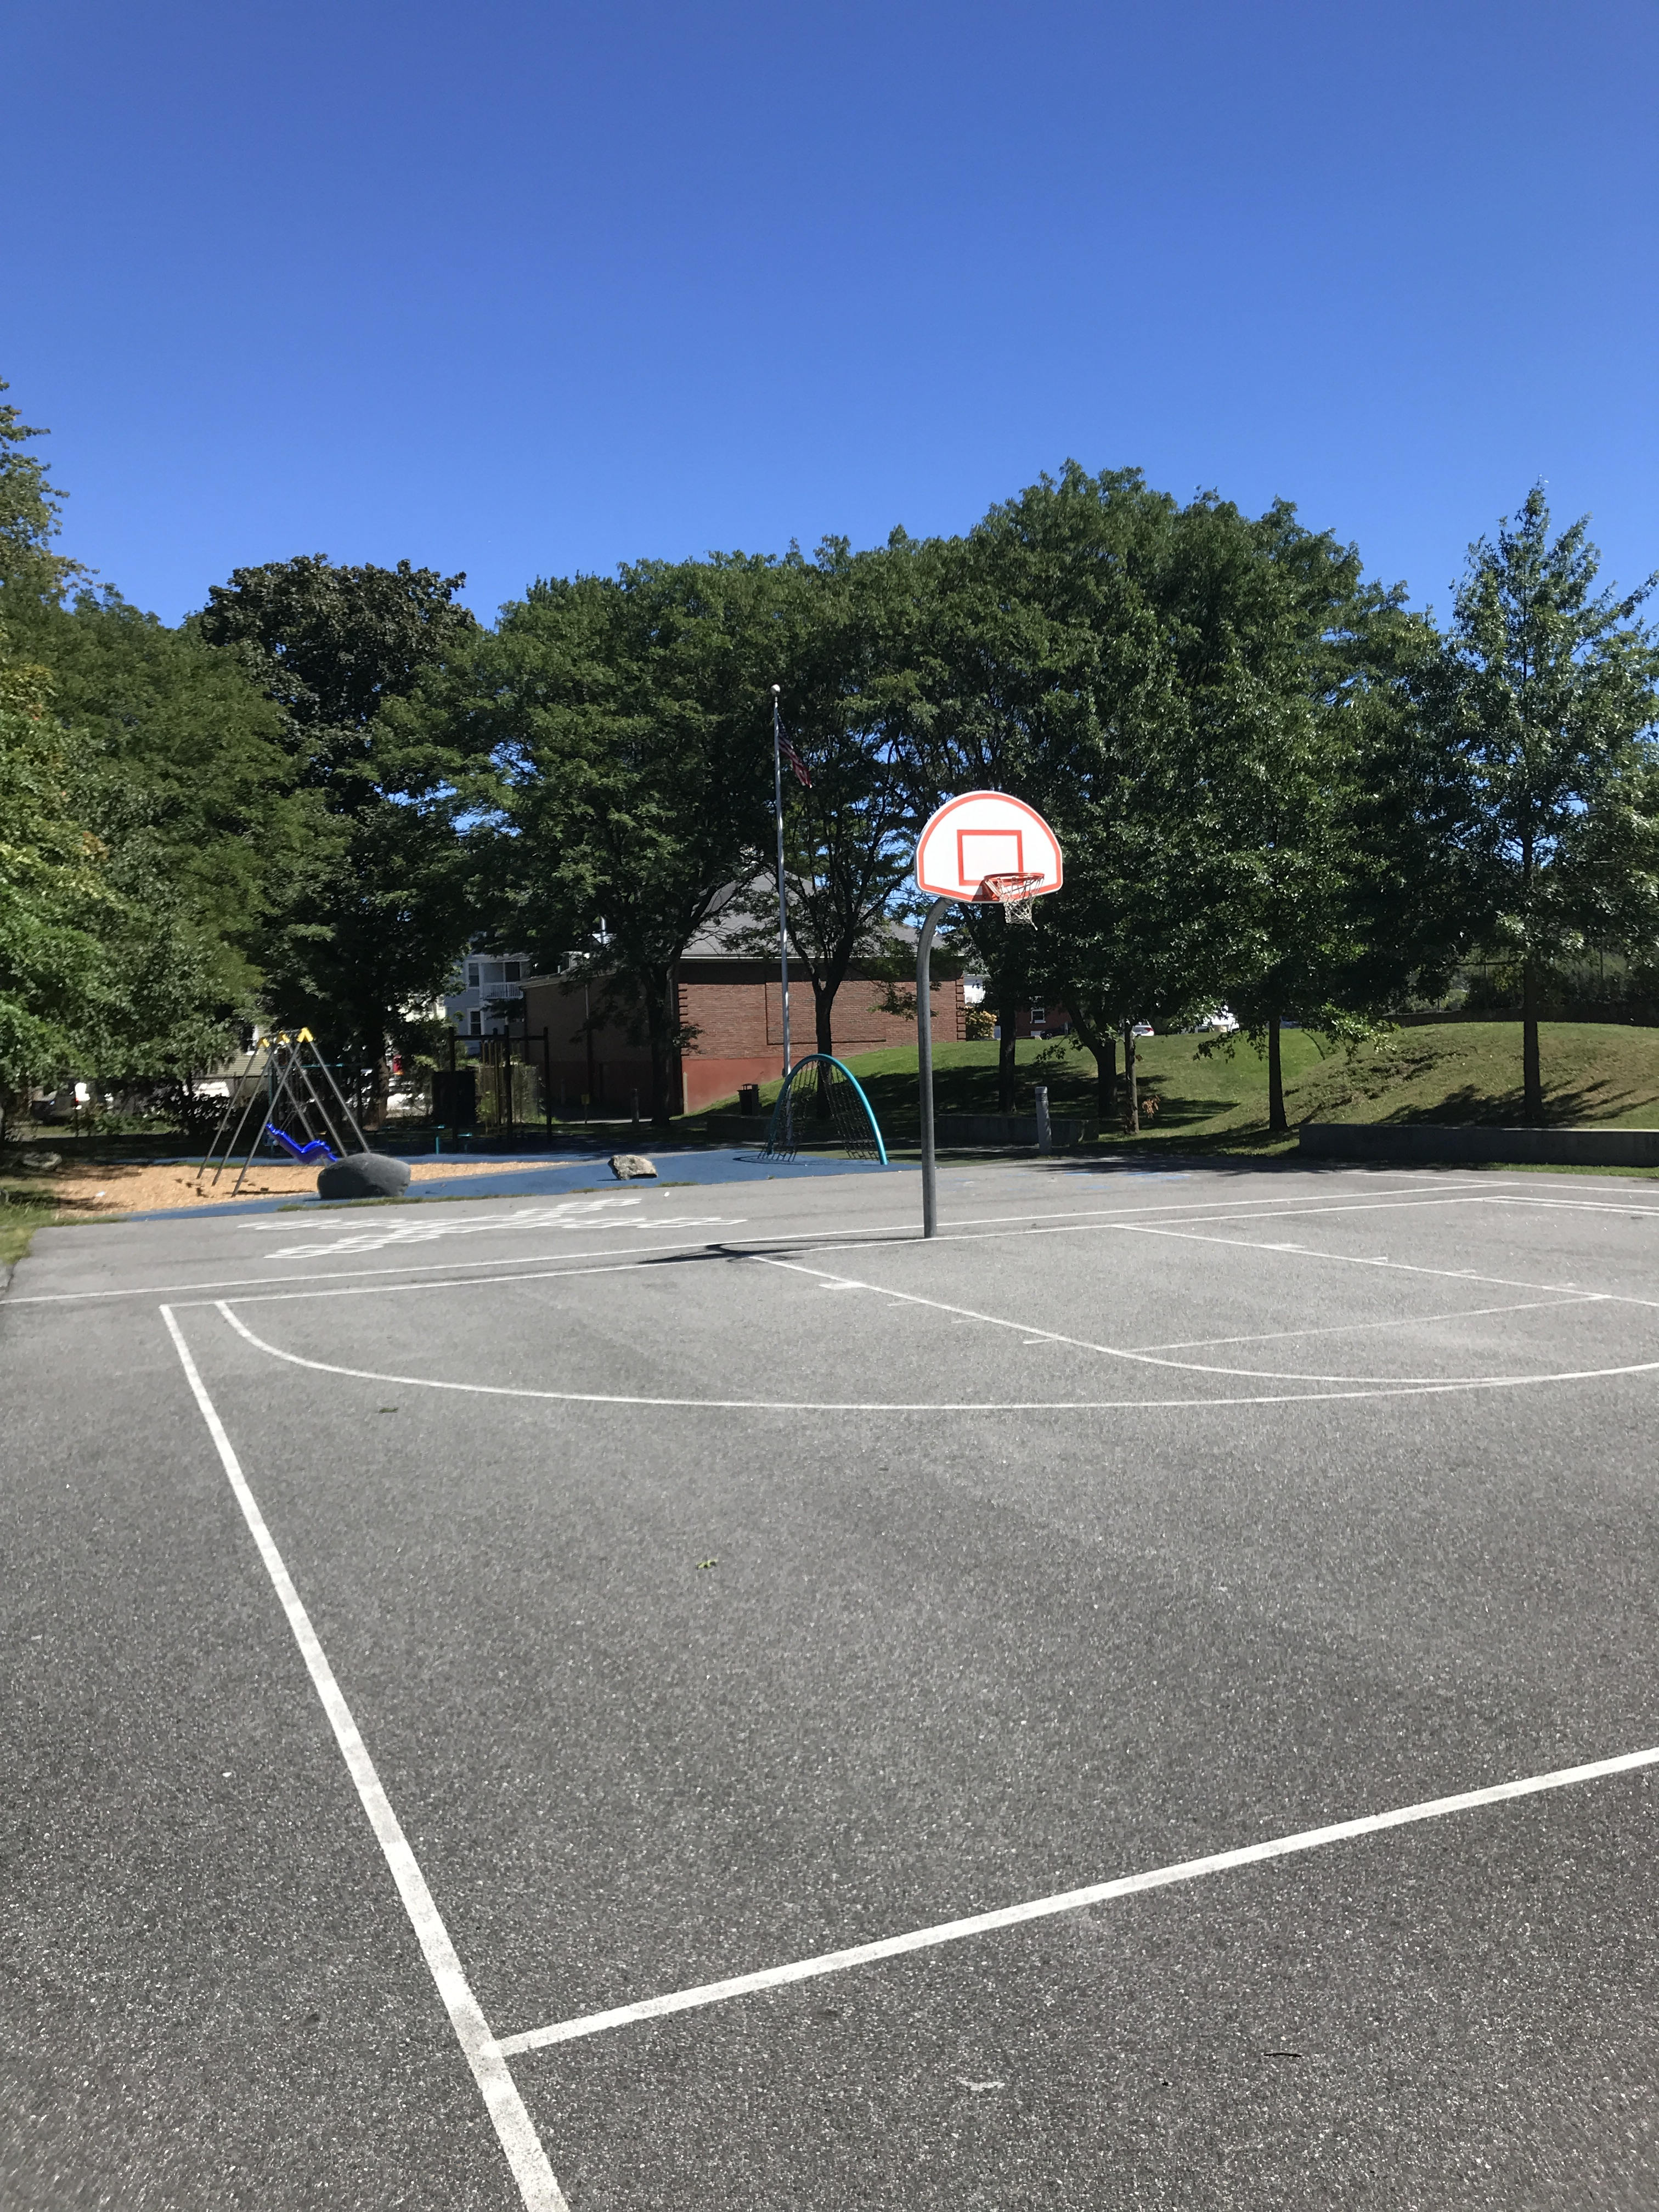 A view across a basketball court, with playground equipment in the background.